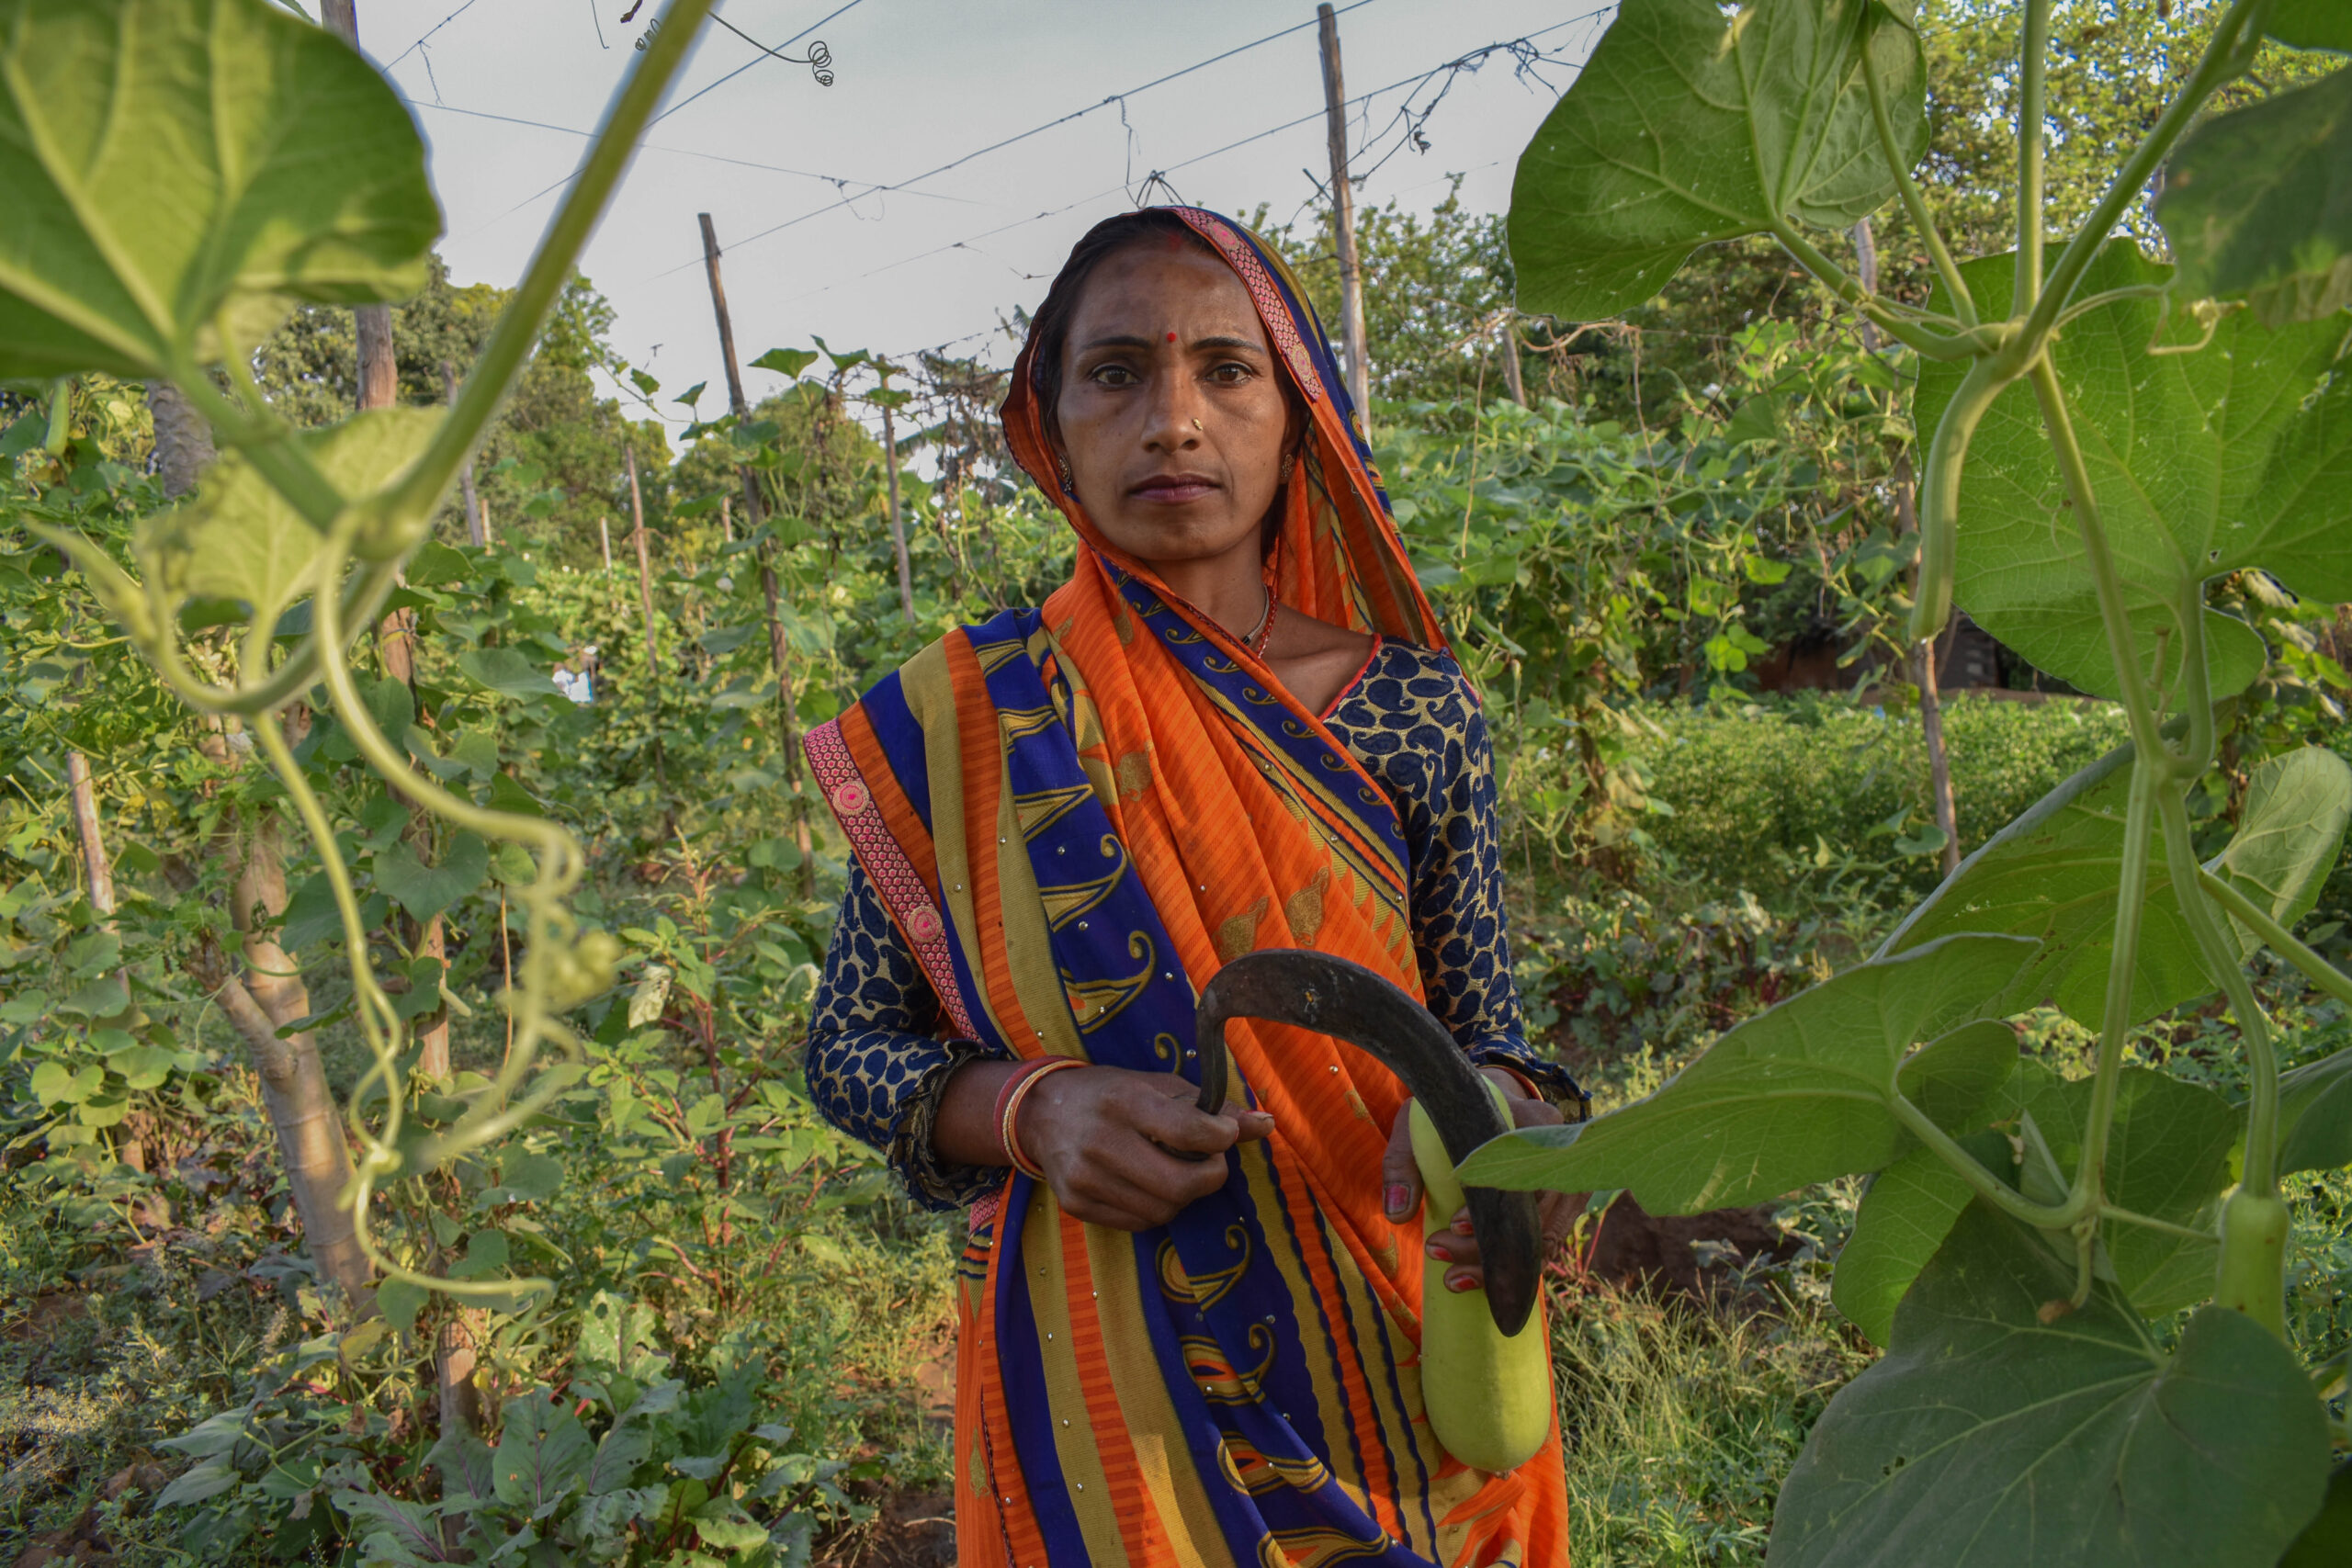 A woman in a colorful patterned sari, rich with bright oranges and blues and golds. She is holding vegetables she has grown on her farm, and is surrounded by bright greenery.